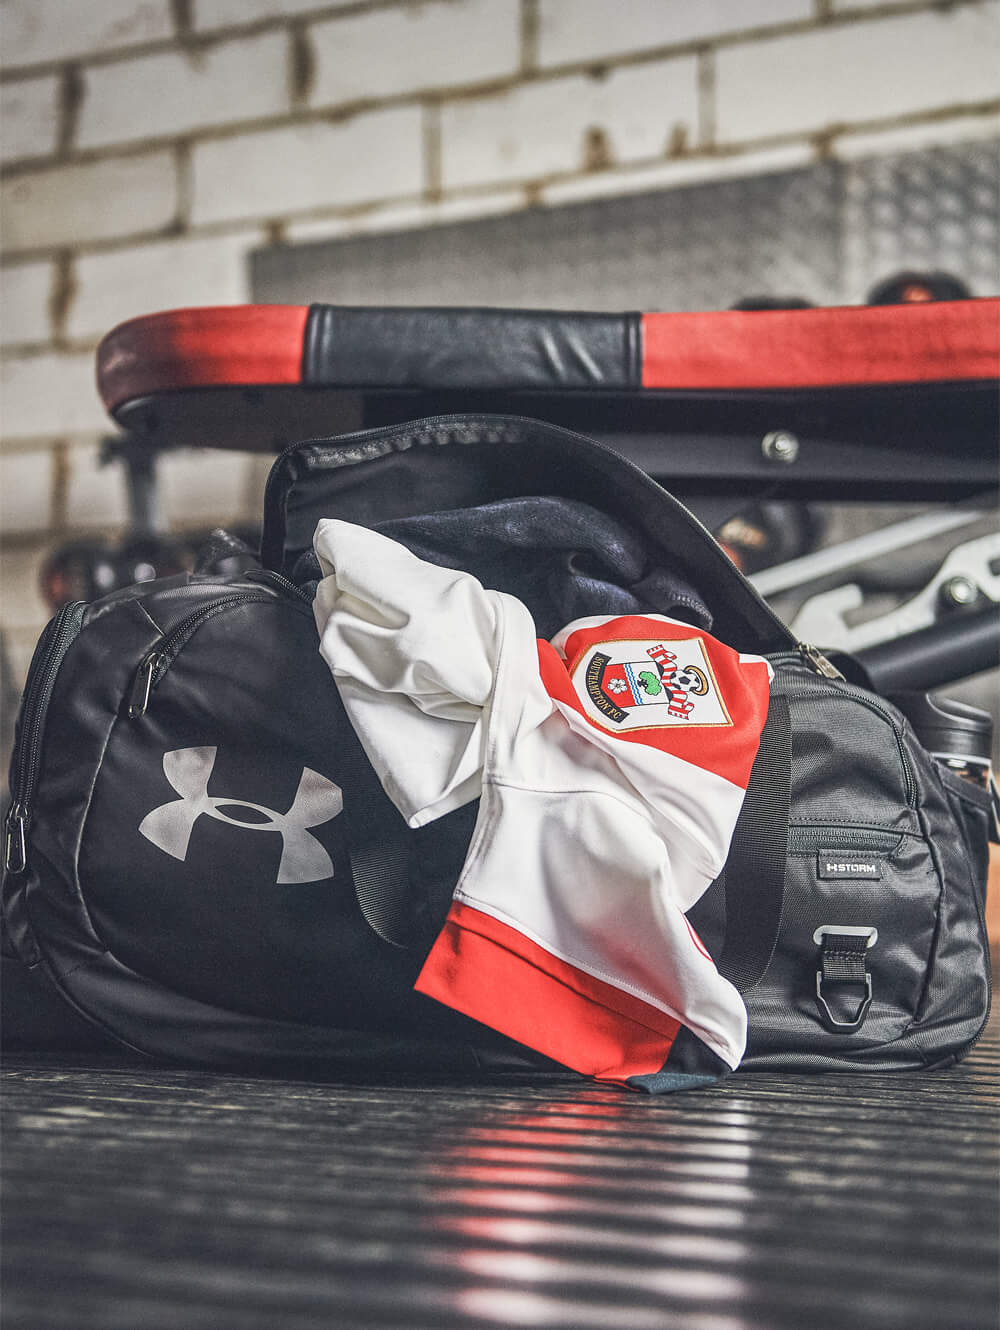 white and red southampton fc football shirt poking out of a black under armour sports bag